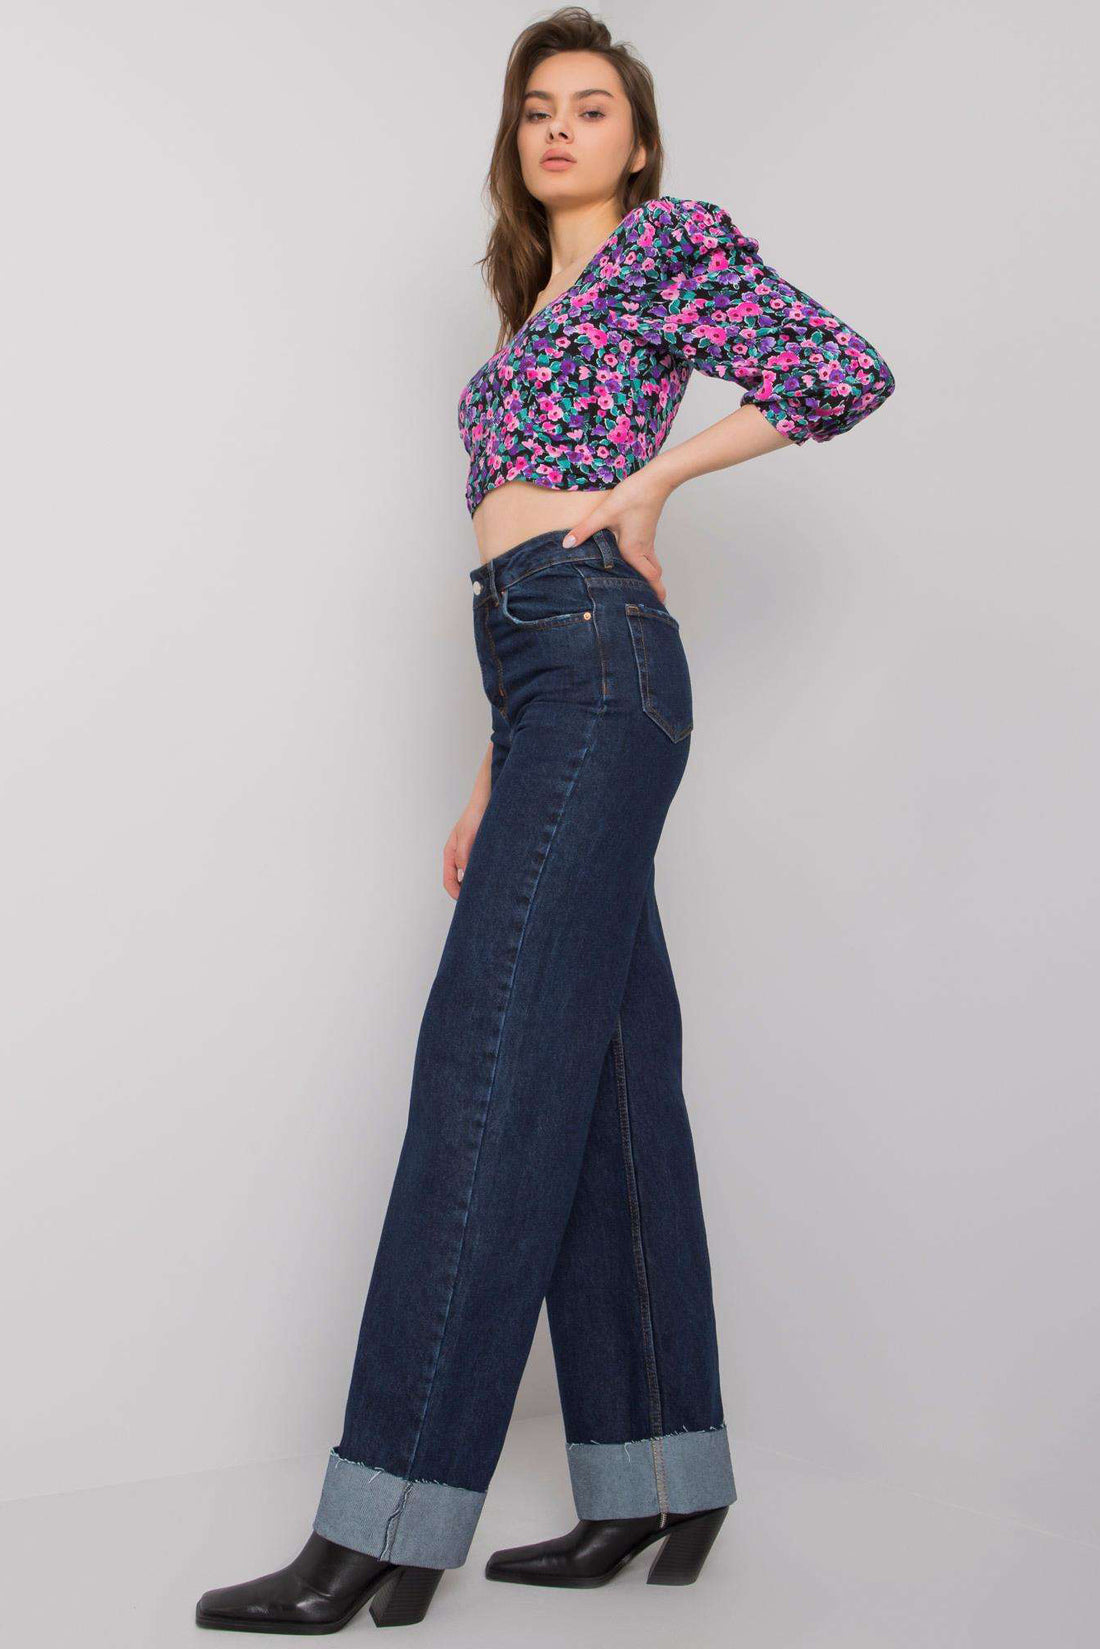 Explore the latest trend with our Turned-Up Cuffs Wide-Leg Jeans. These jeans offer a contemporary twist with stylish turned-up cuffs, combining fashion and comfort effortlessly. Elevate your wardrobe with this trendy addition today.